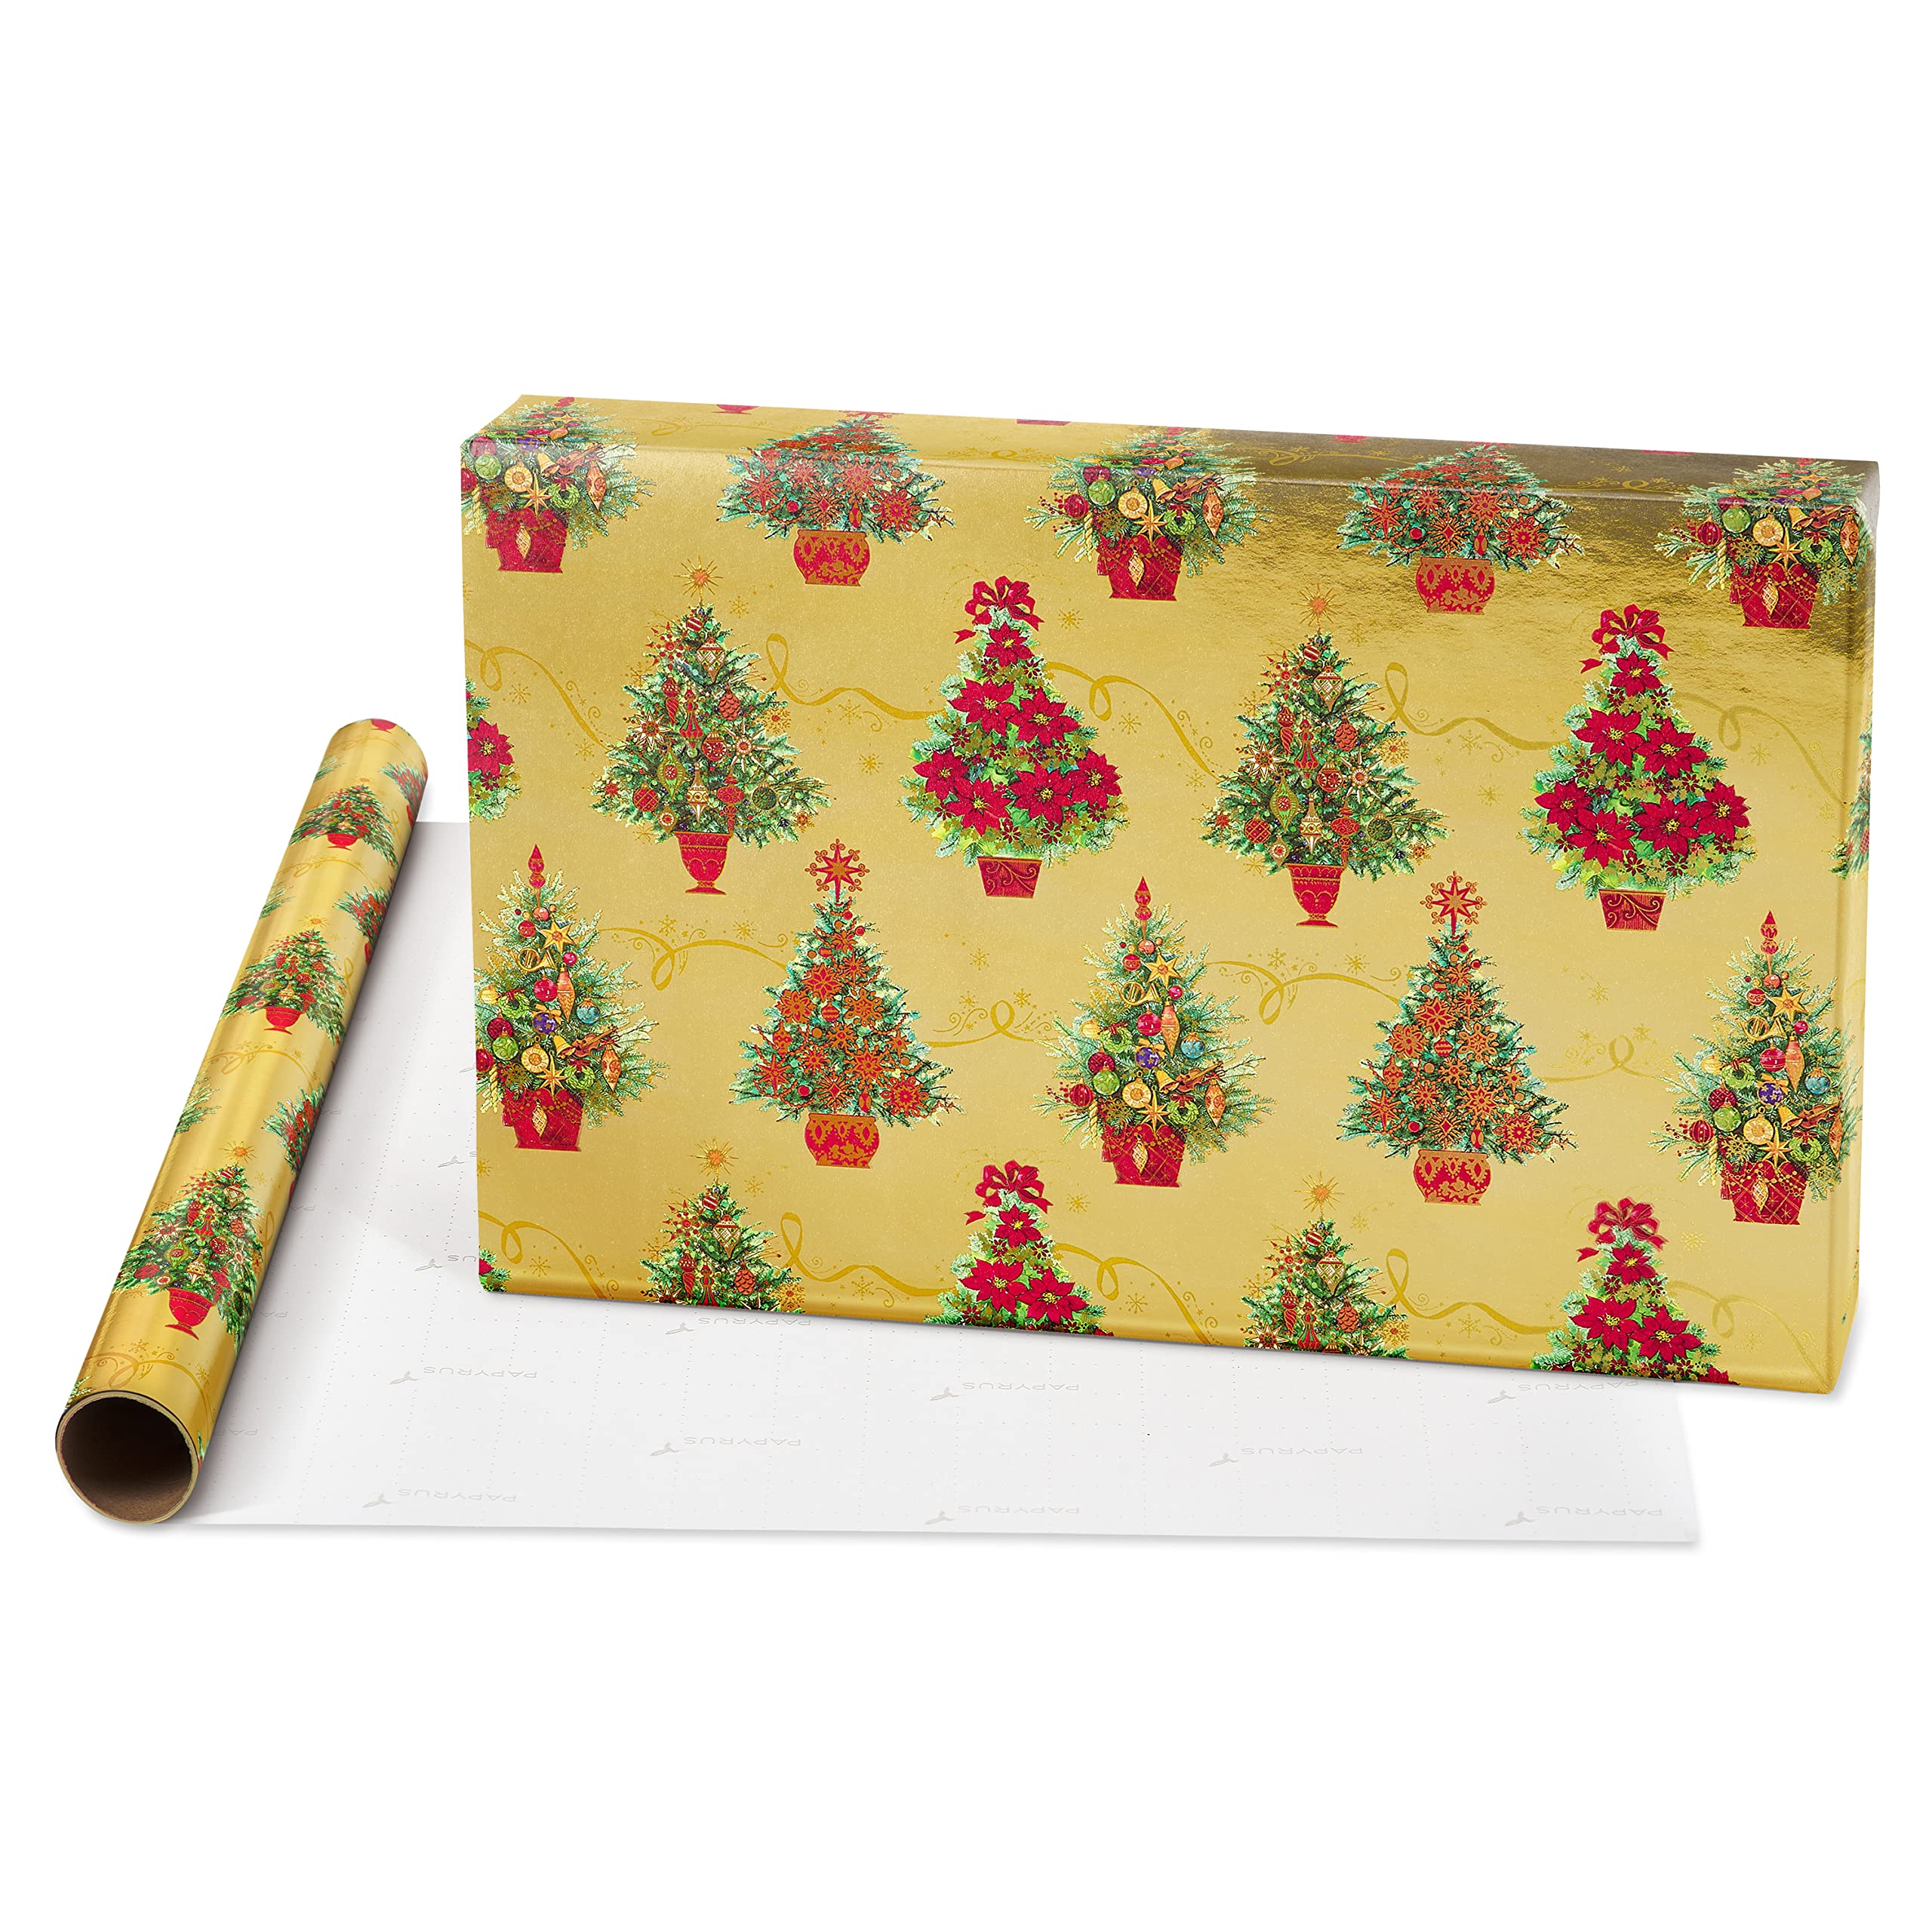 Papyrus Christmas Wrapping Paper Rolls, Metallic Red, Christmas Tree, Christmas Tidings (3 Rolls, 65 sq. ft.)